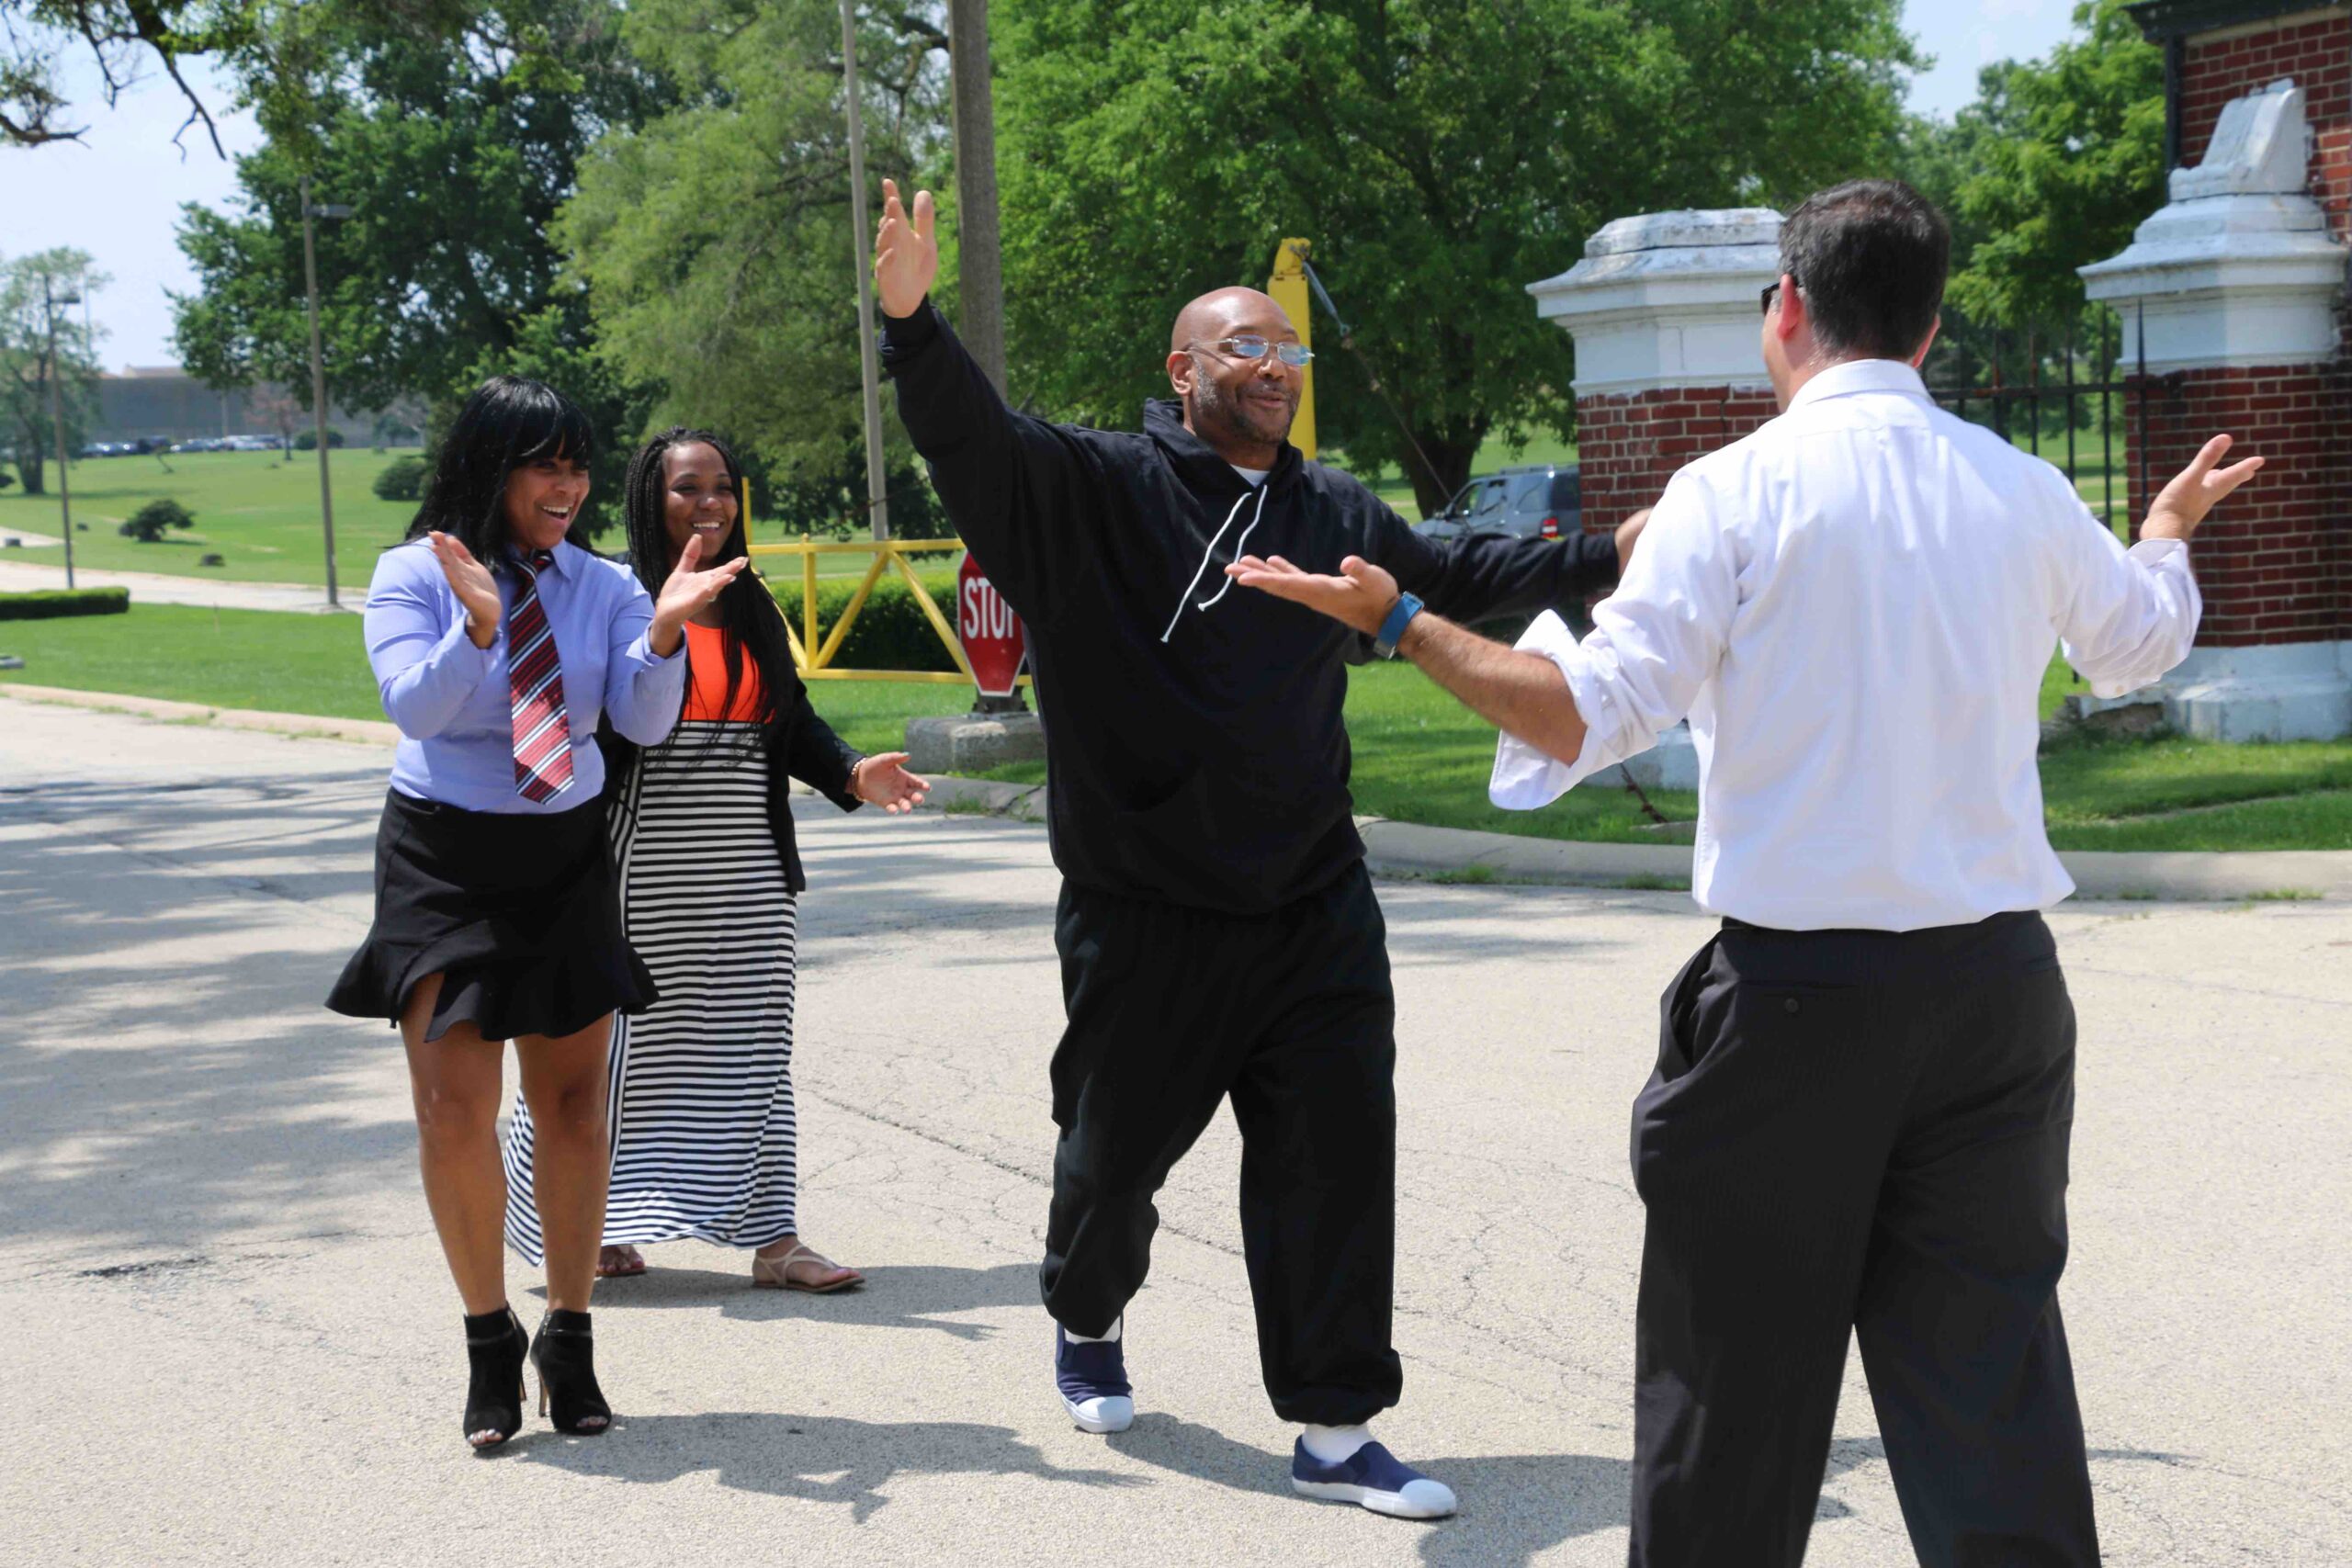 Exoneration Project client Anthony McDaniels was released on June 26, 2018 after spending 10 years in prison for a crime he did not commit. Photo by Atzimba Parra, courtesy of the Exoneration Project.